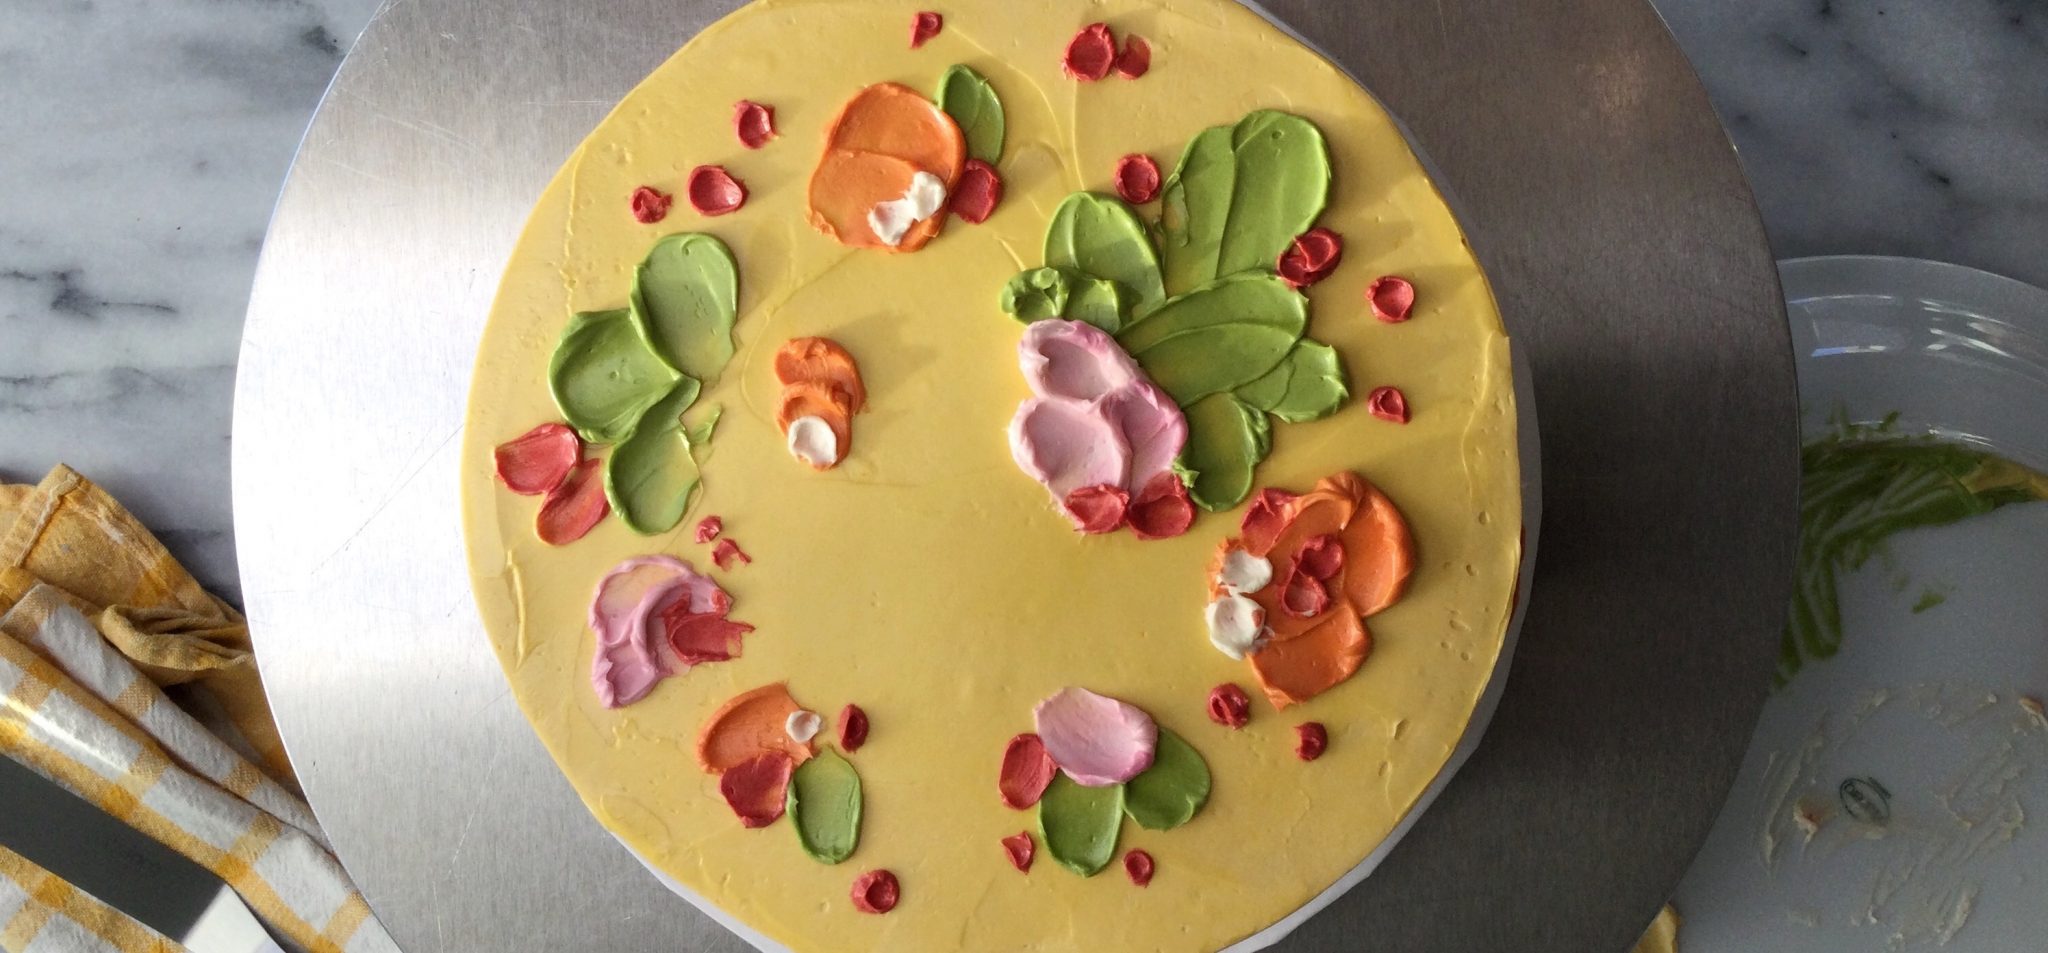 TD Community Sunday: Paint Your Cake with Libby Brewer-Dulac from Sift Baking Co.